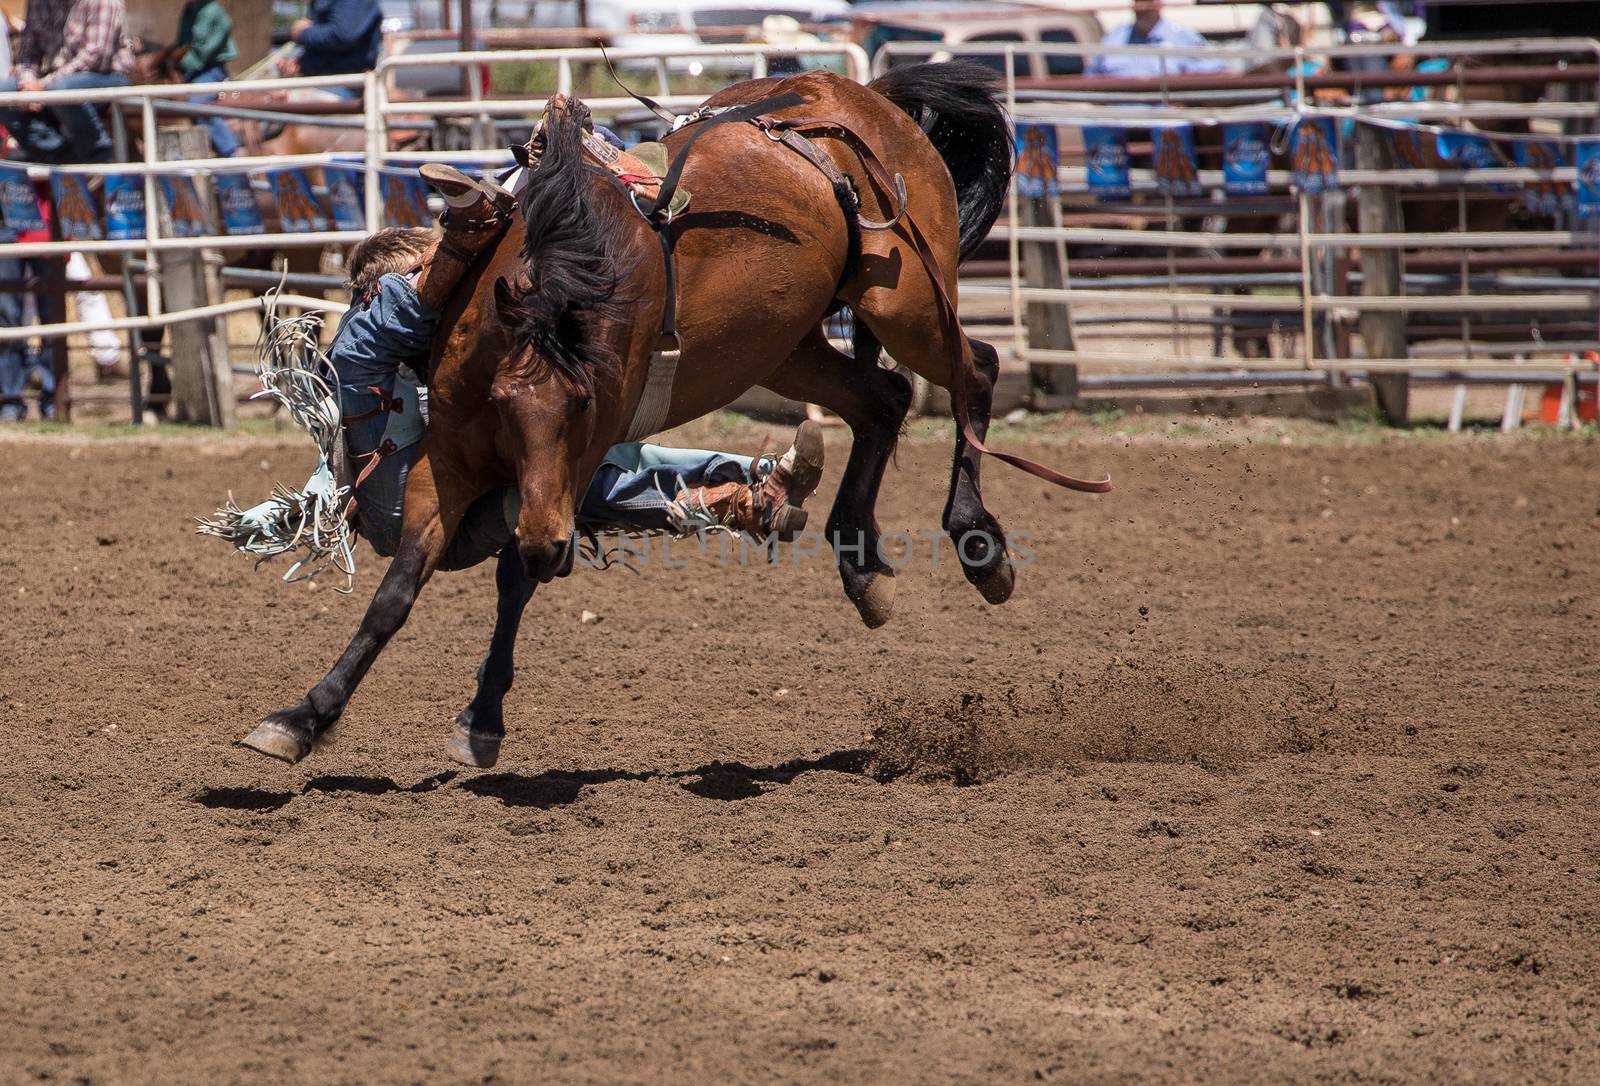 A cowboy is headed for the dirt . The rodeo in Cottonwood, California is a popular event on Mother's Day weekend in this small northern California town. This photo was taken in May, 2014.